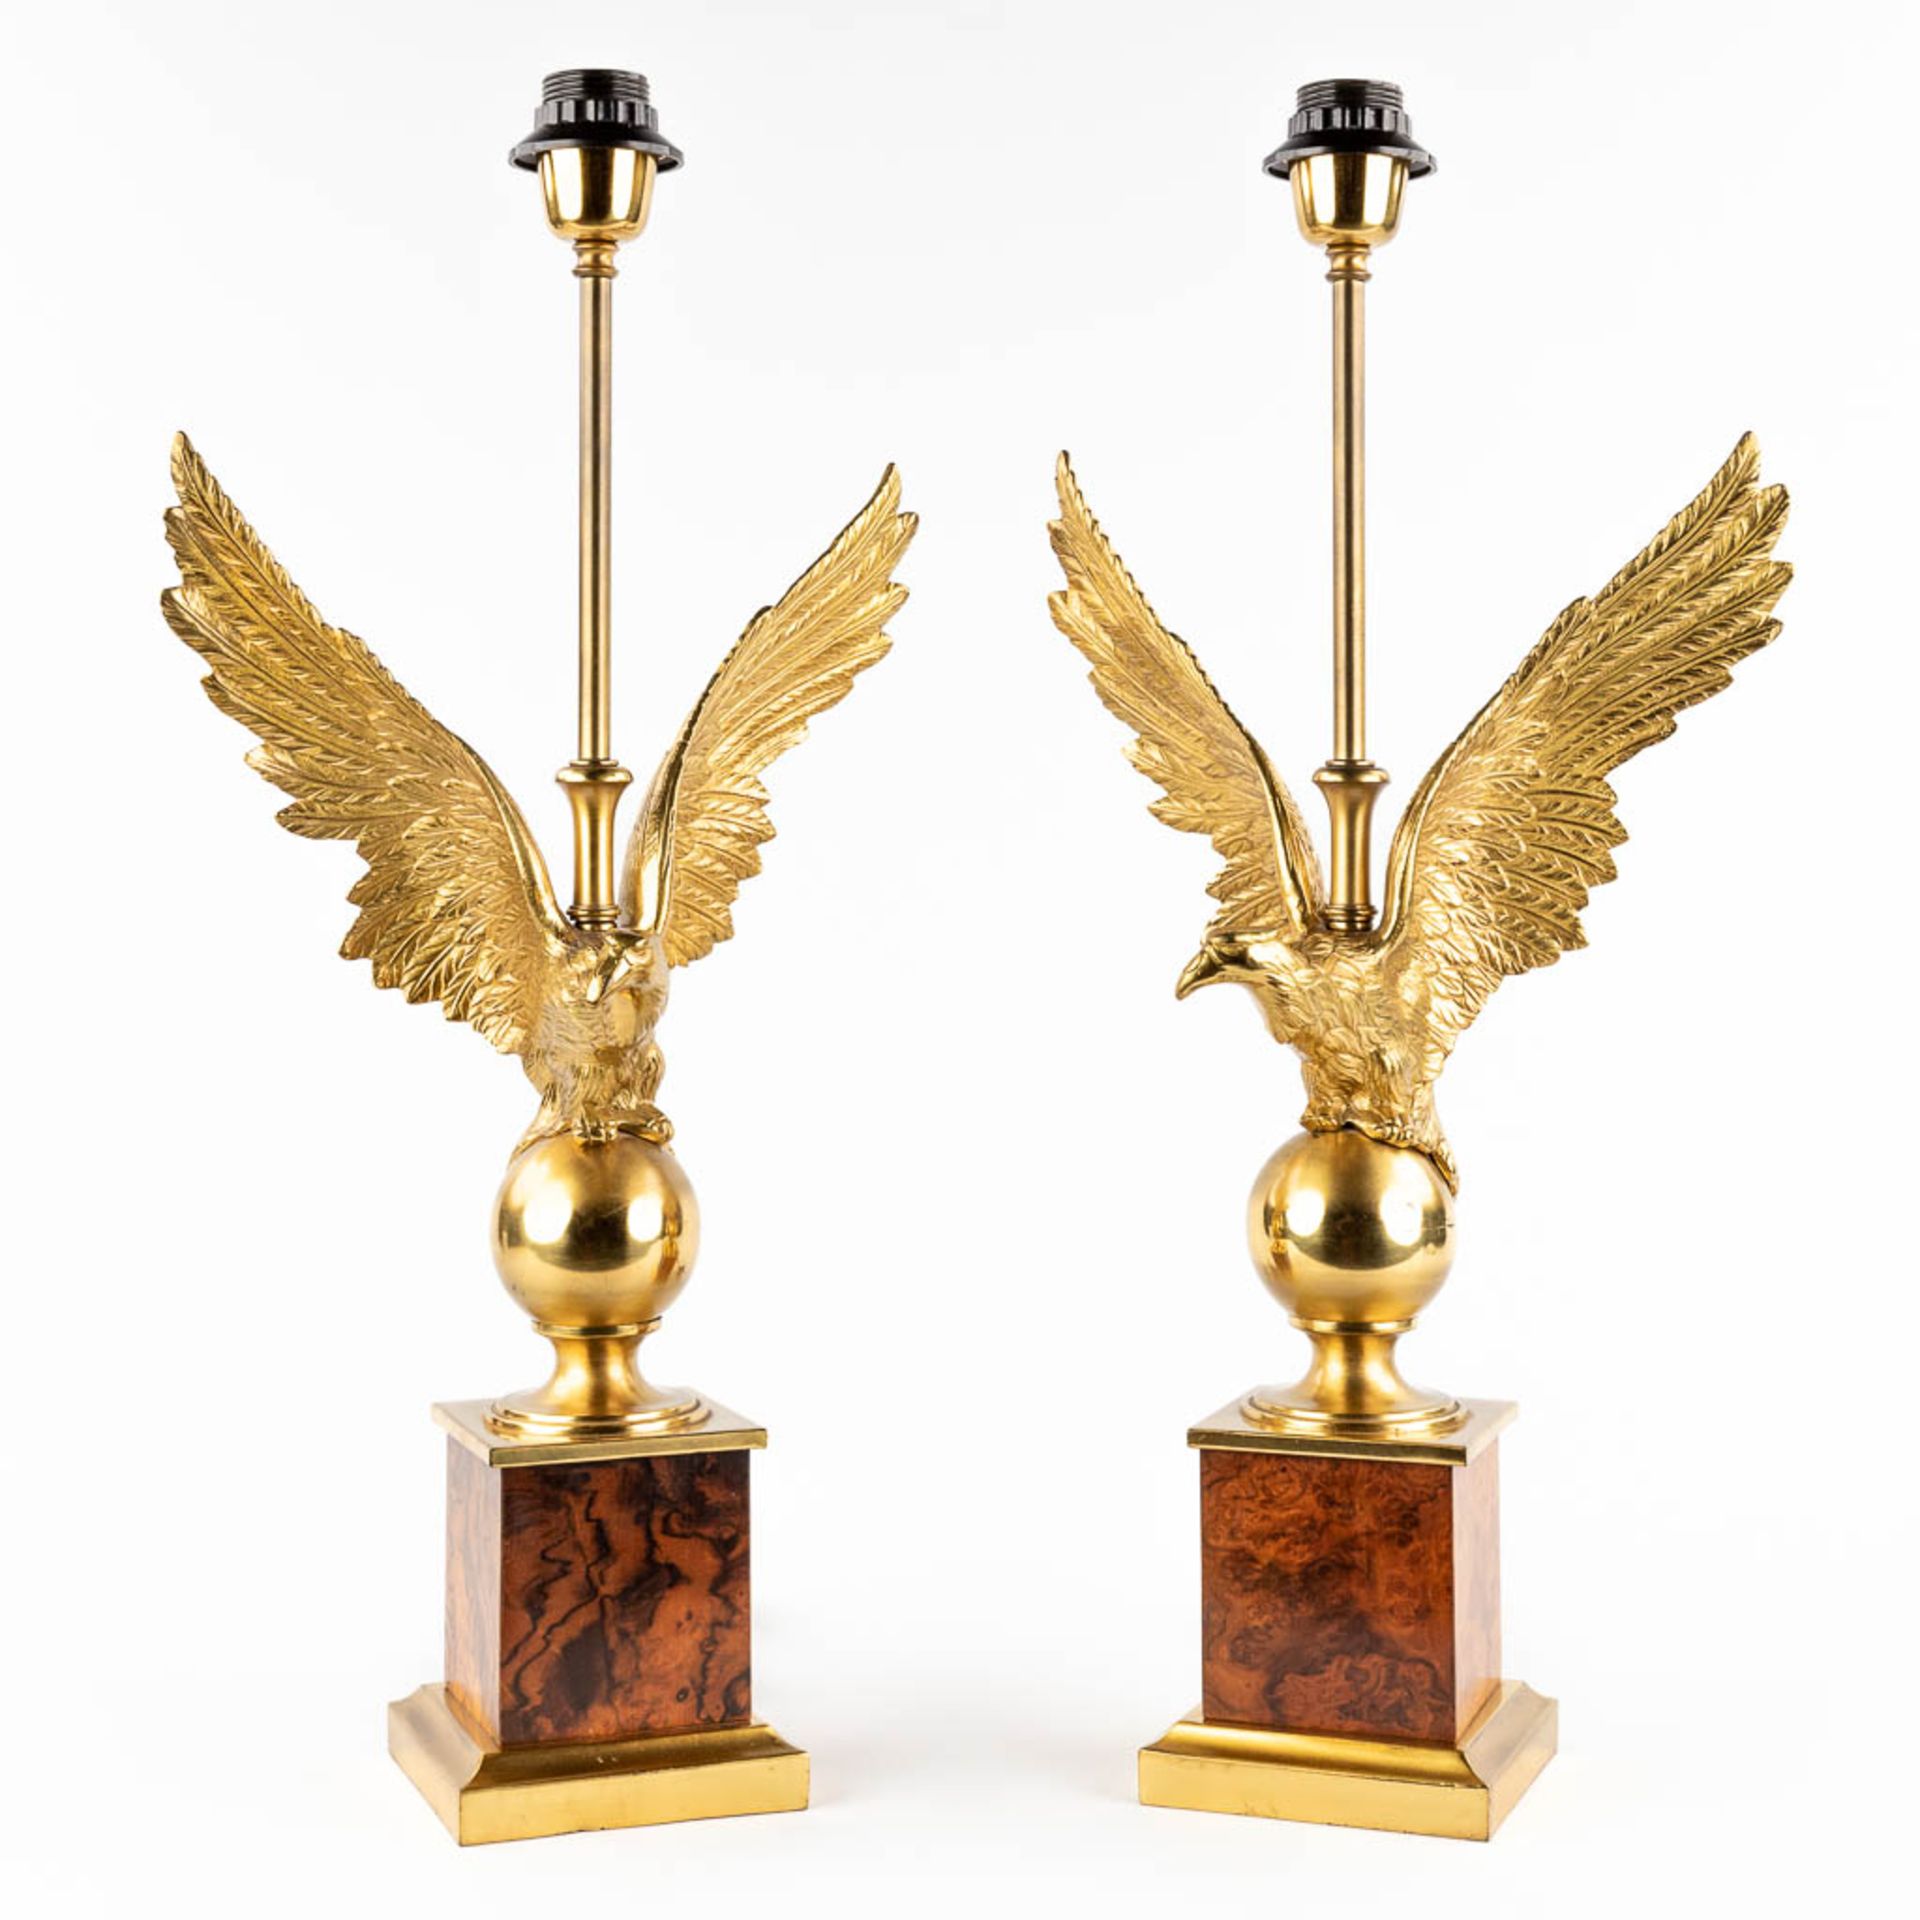 A pair of table lamps with an eagle figurine. Hollywood Regency style. 20th C. (L:15 x W:30 x H:61,5